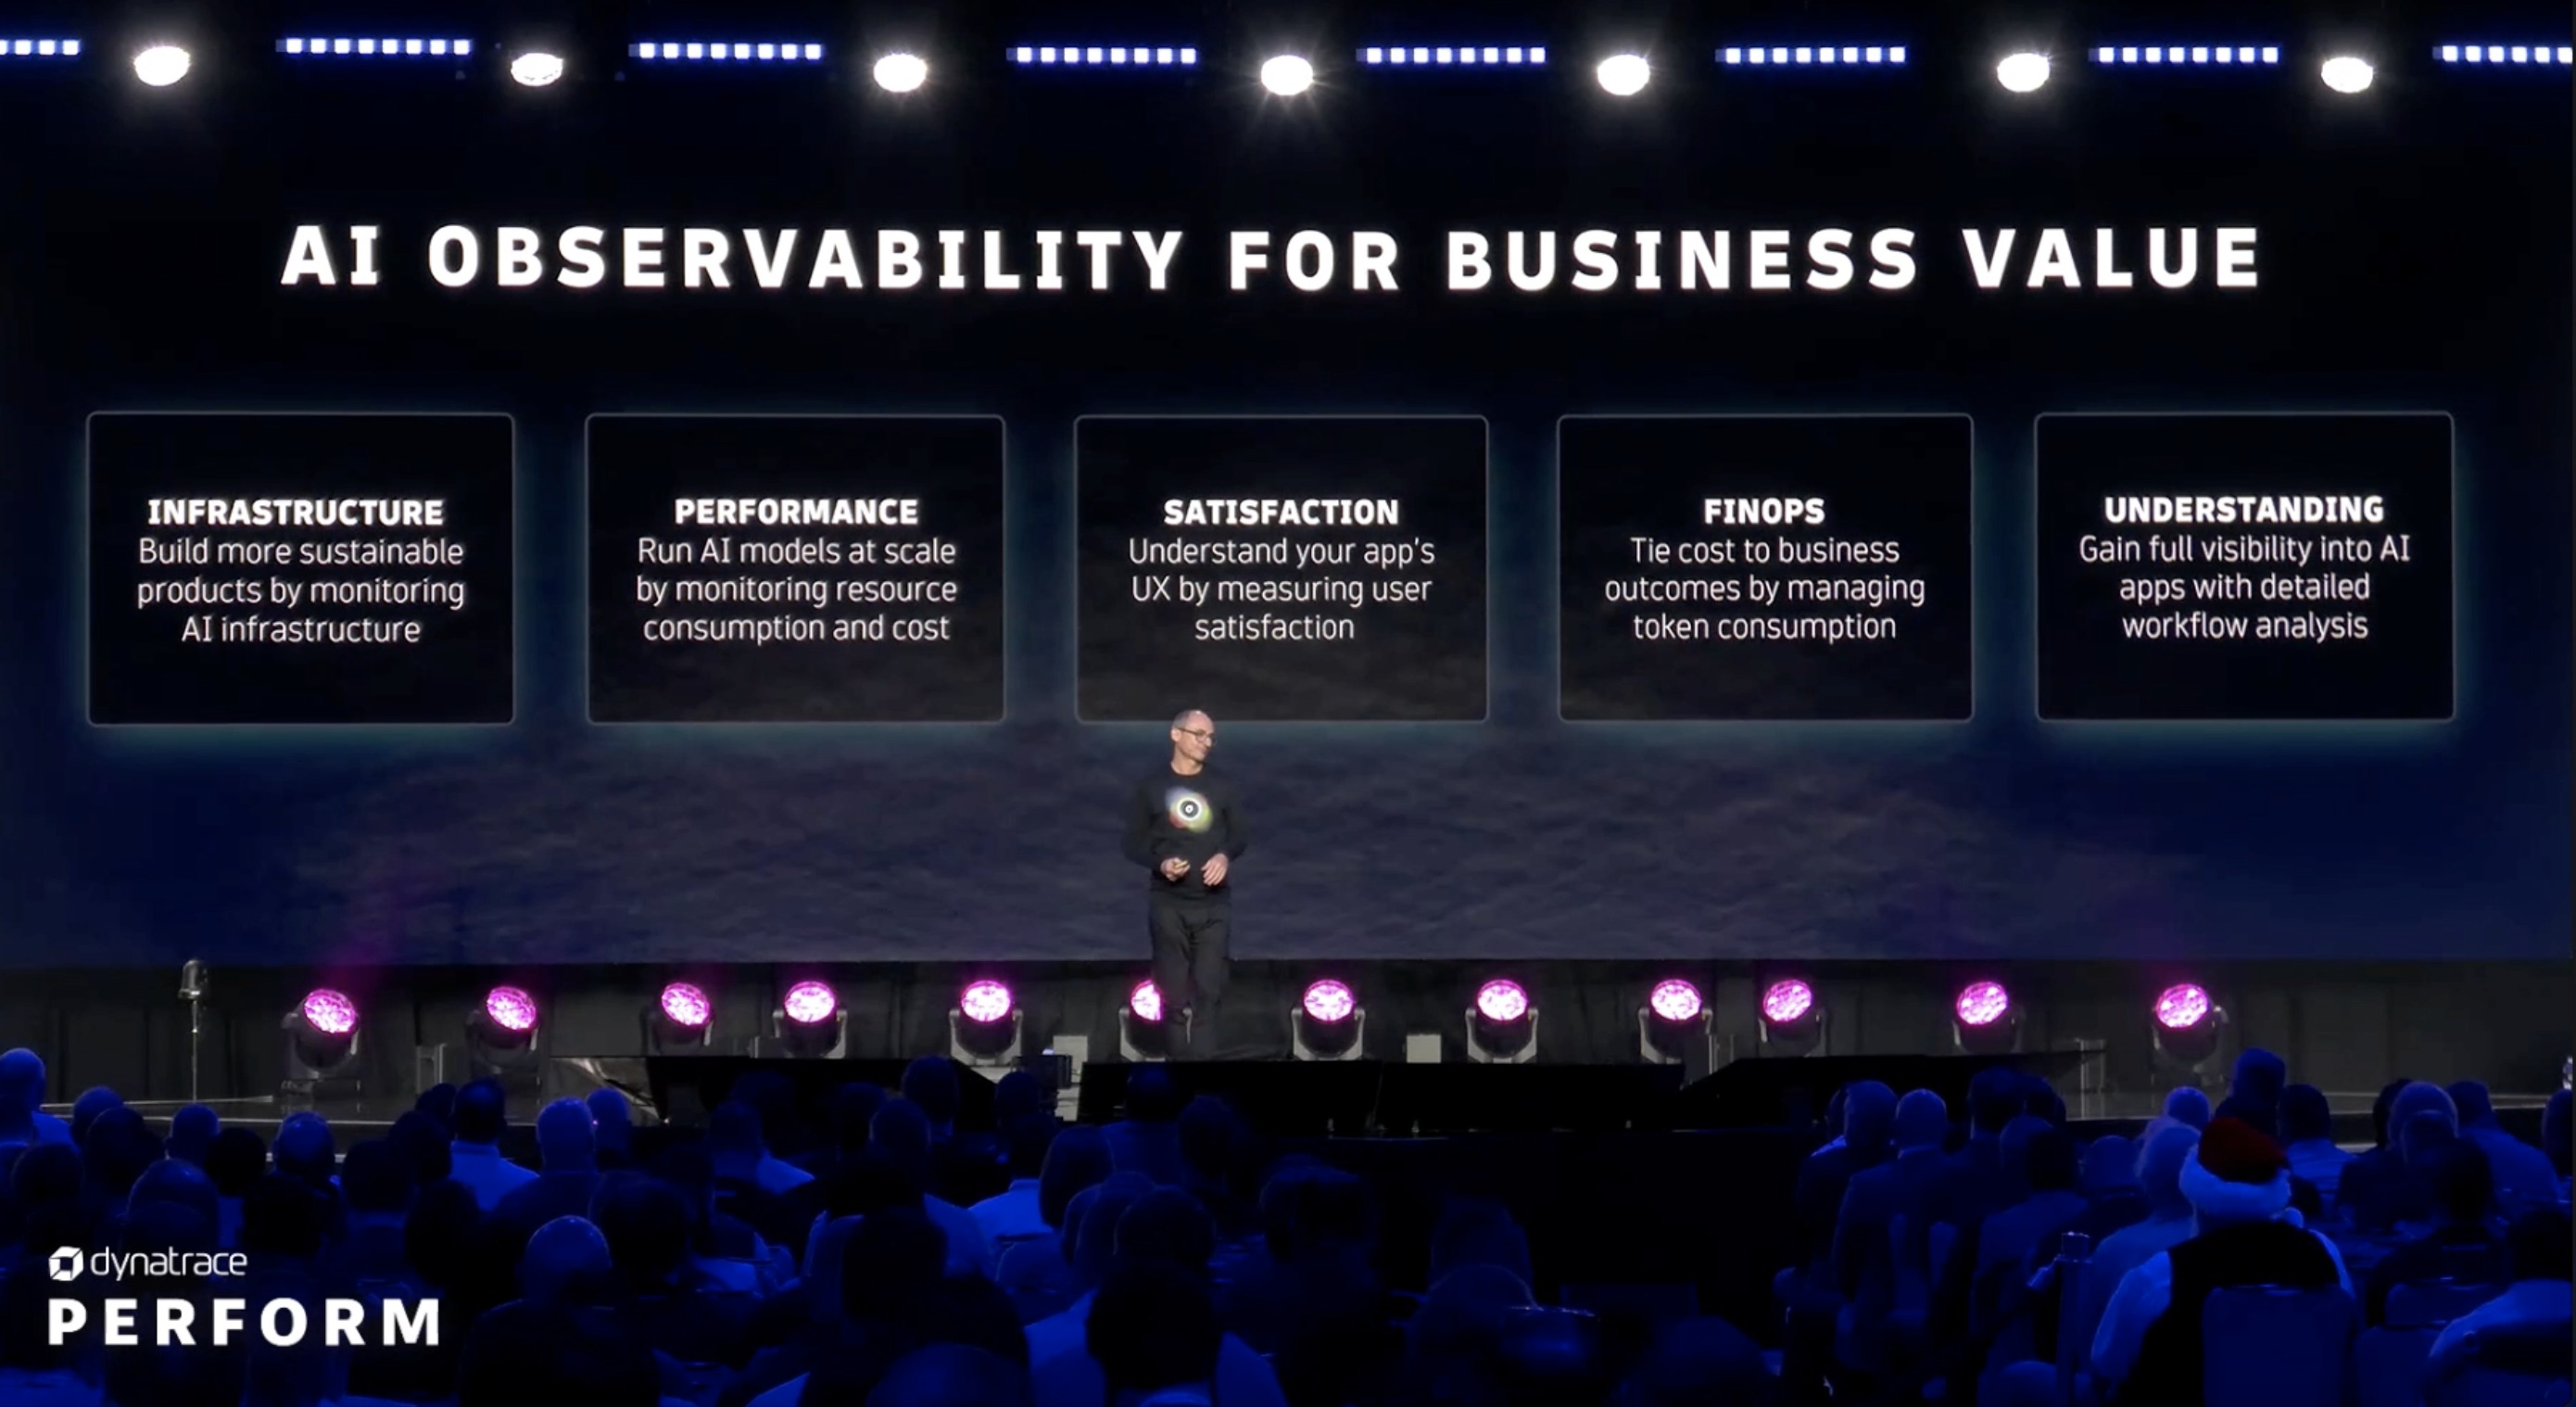 AI Observability for business value